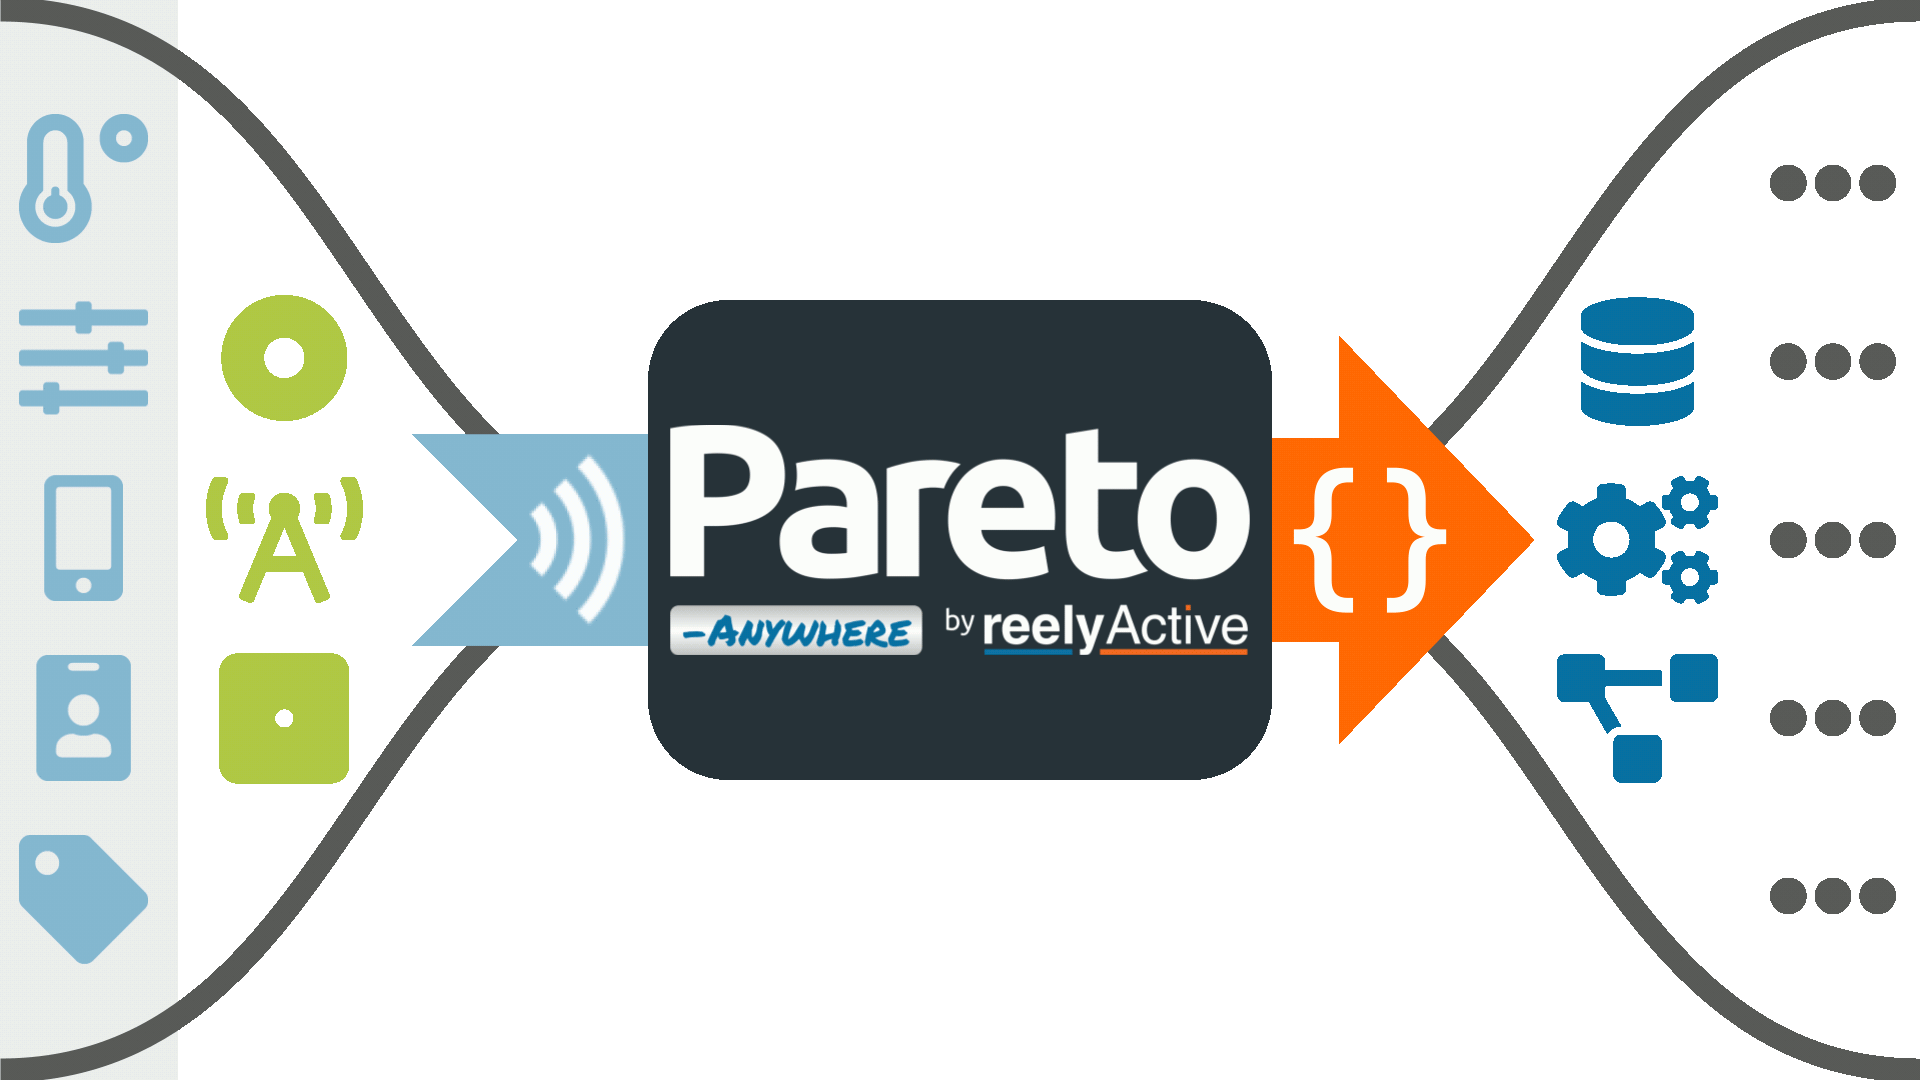 Pareto Anywhere Ambient Devices